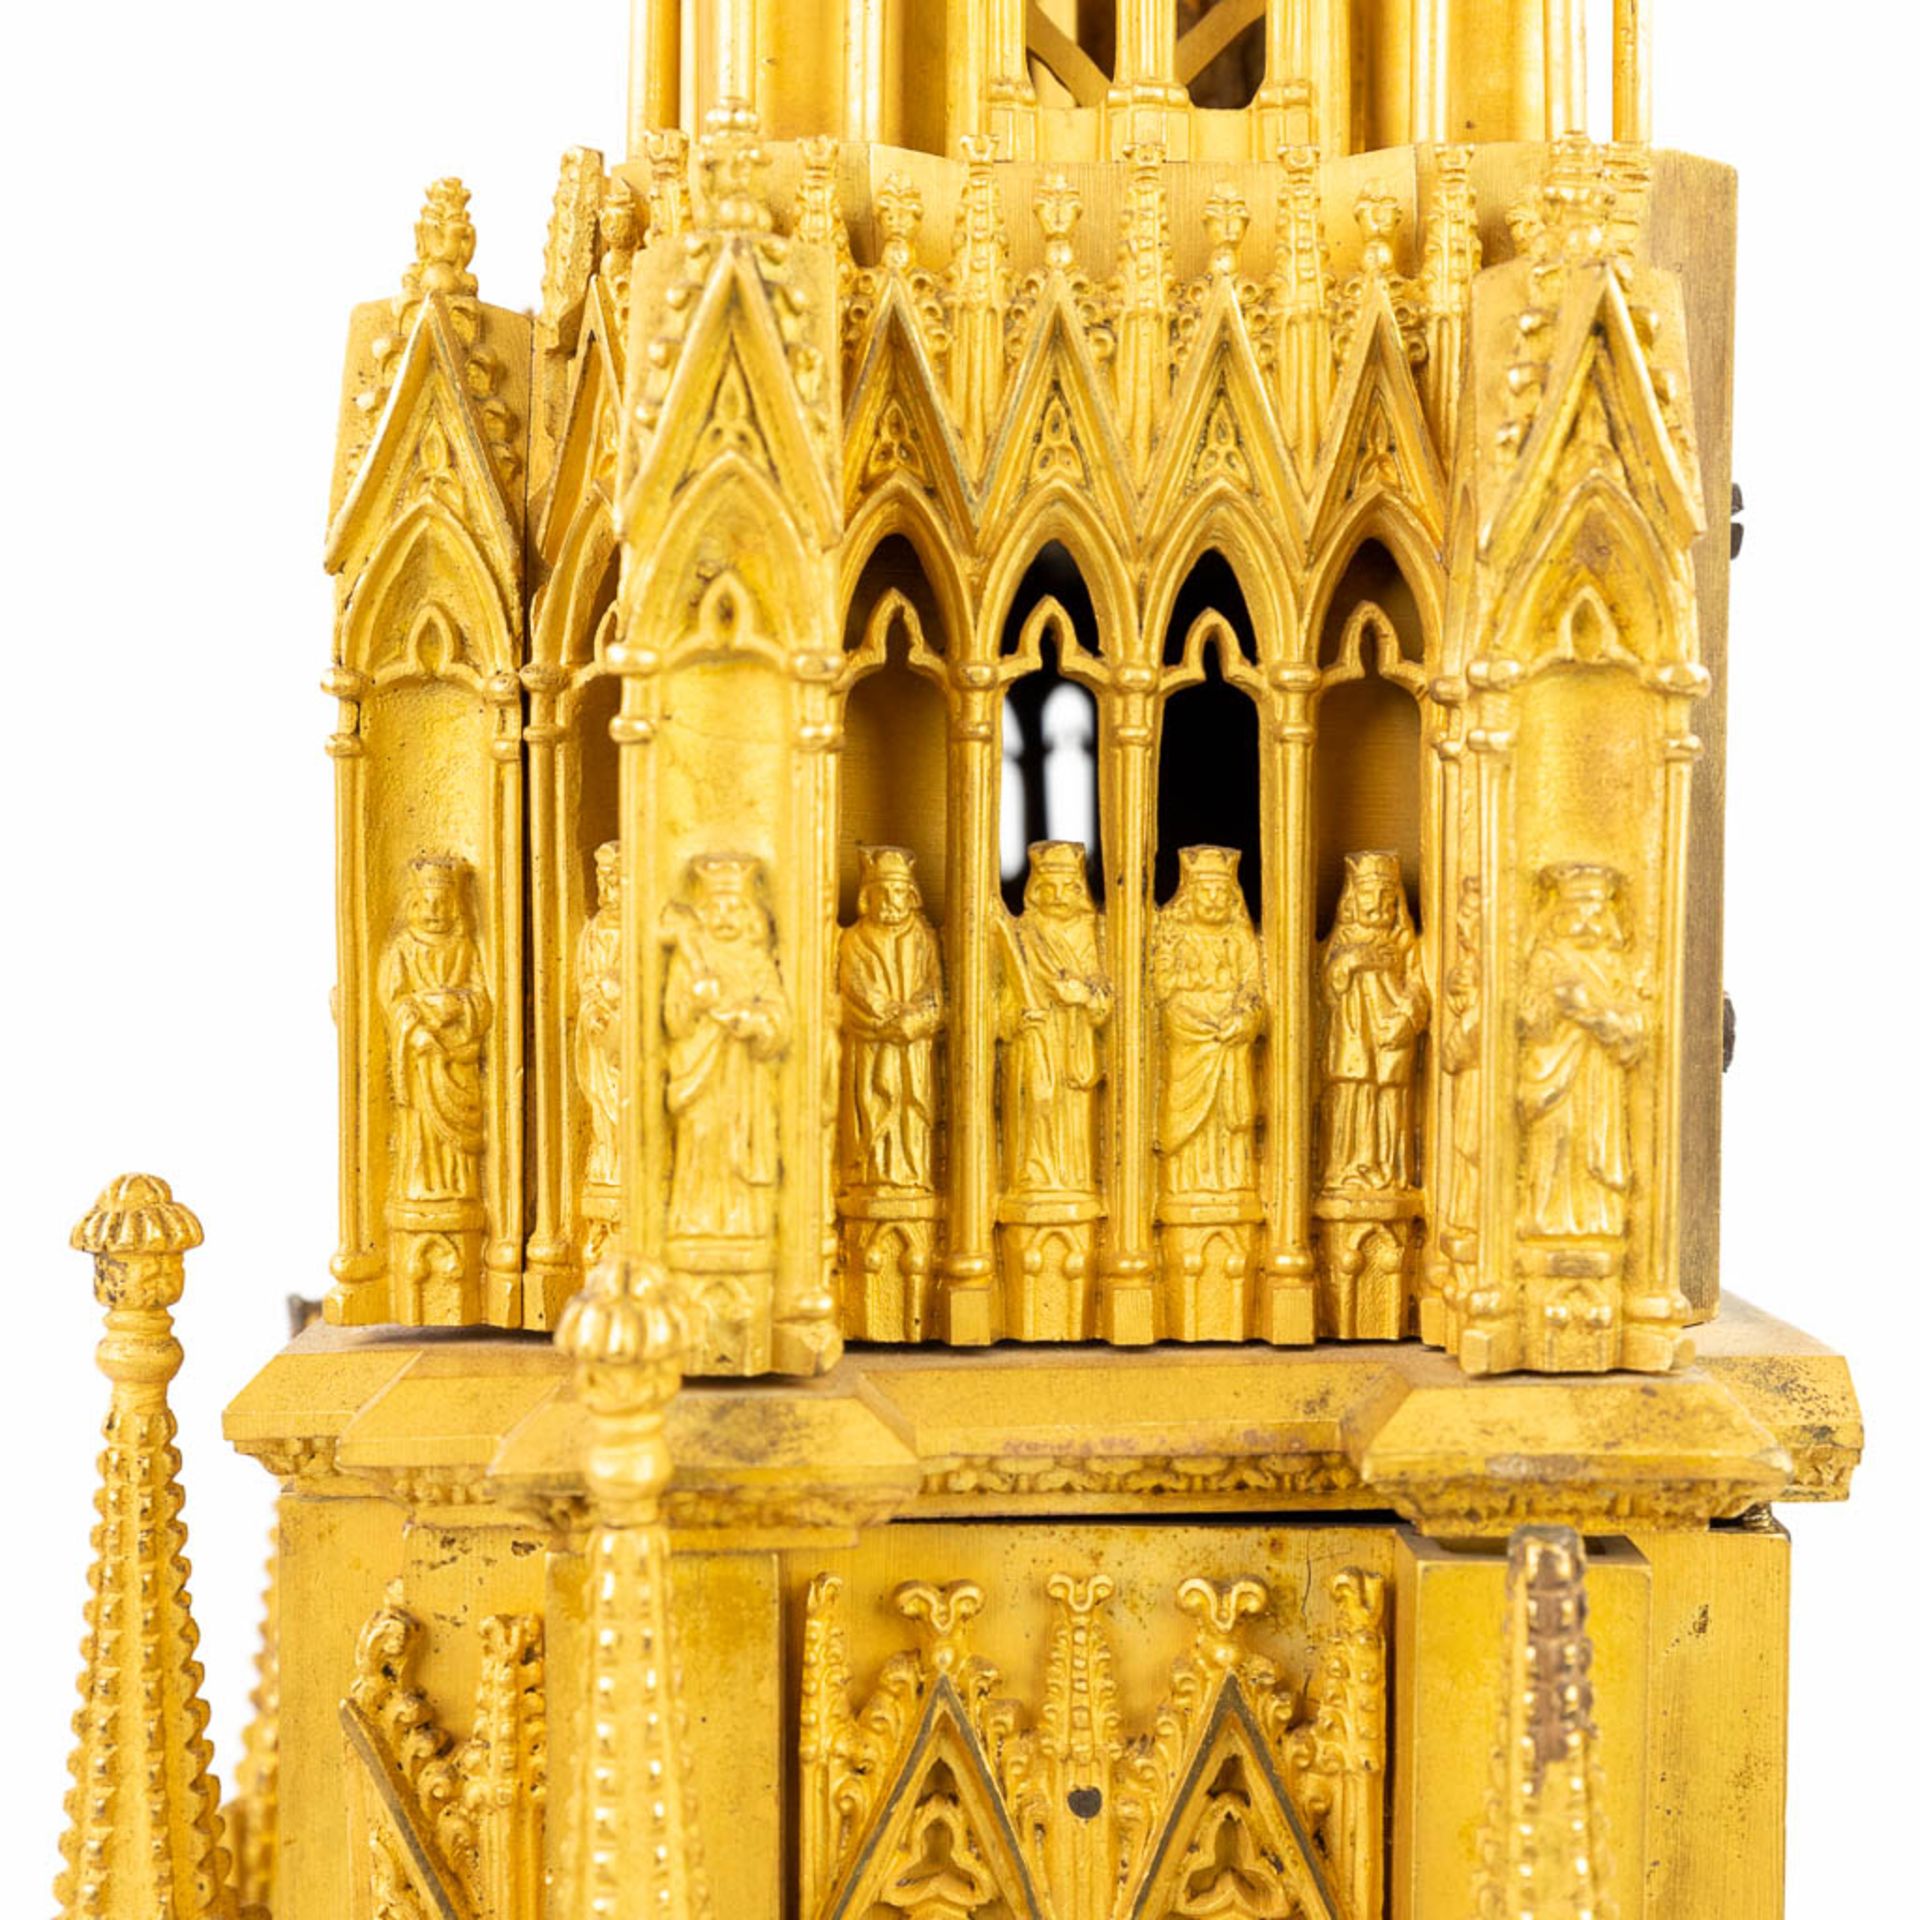 Cathedrale de Reims, an exceptional mantle clock made of gilt bronze. (15 x 31 x 47cm) - Image 15 of 16